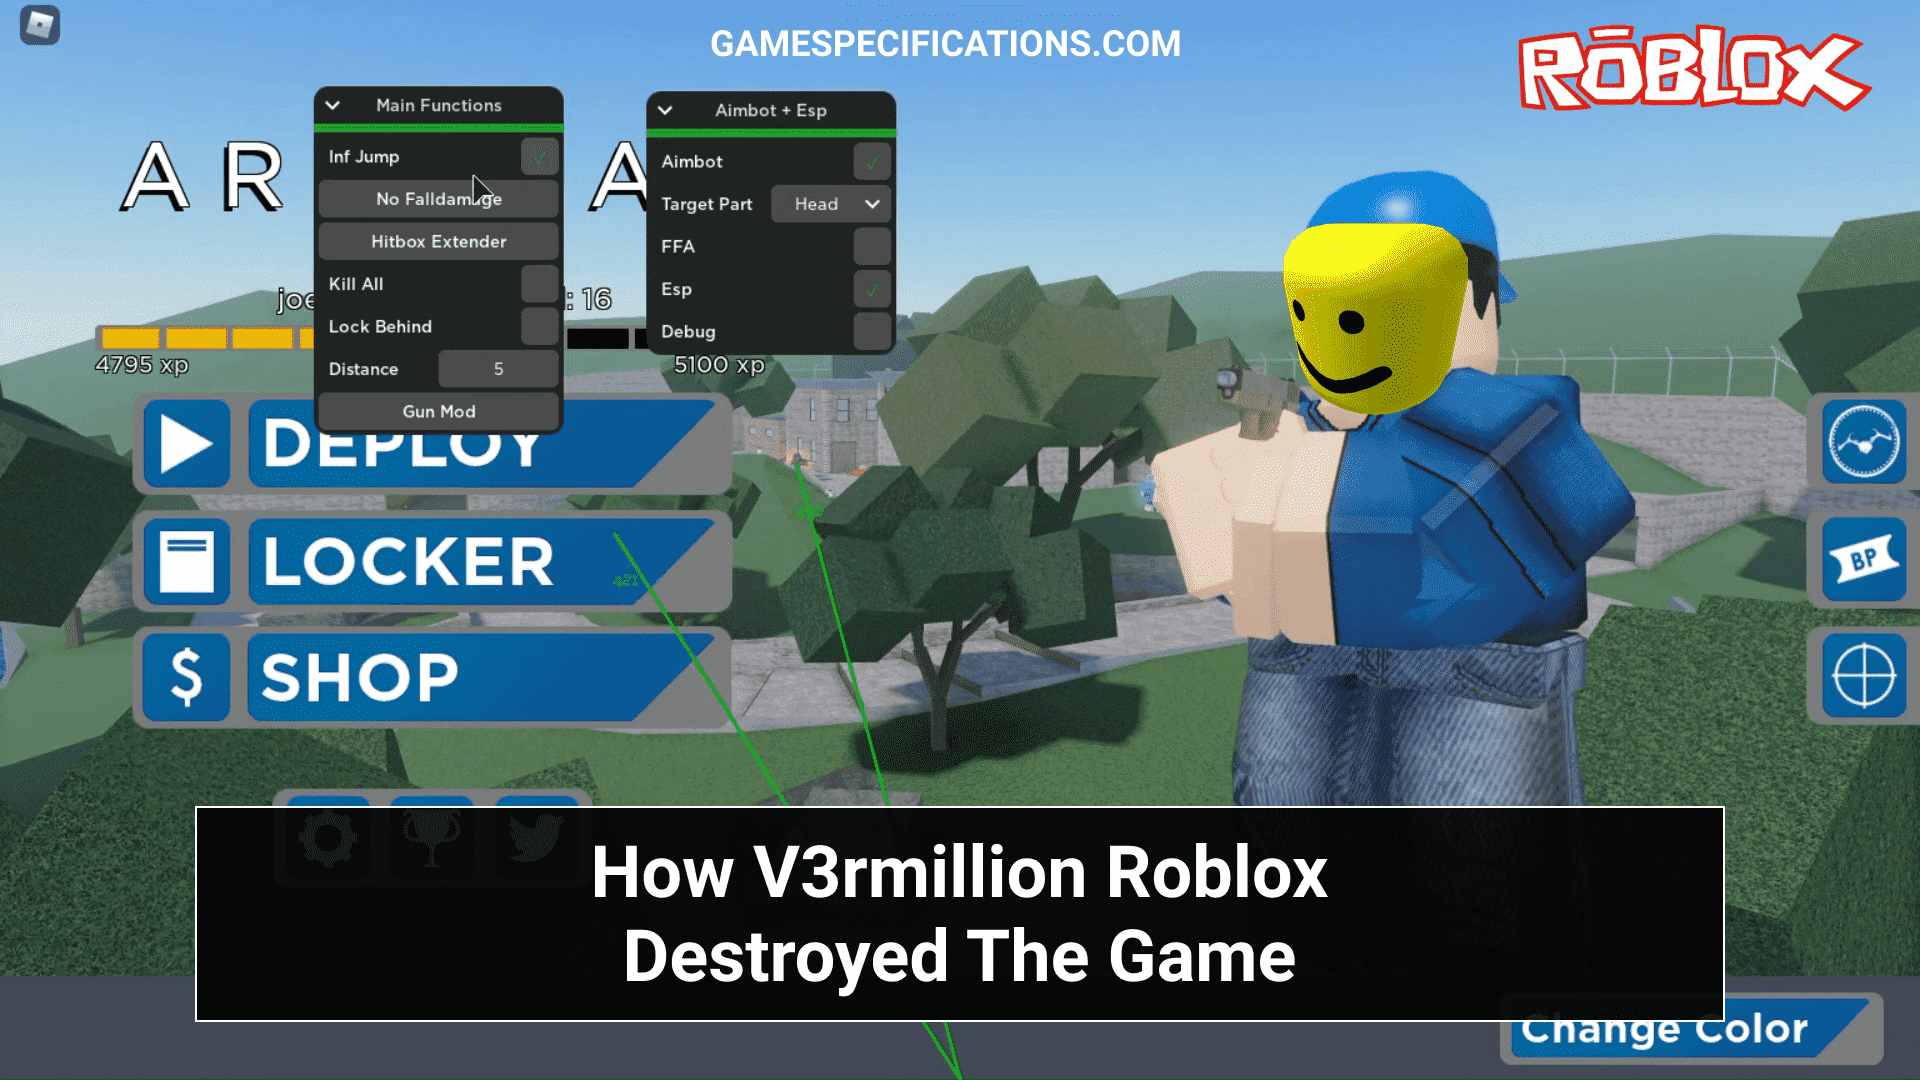 V3rmillion Roblox Breaked The Game By Using Powerful Exploits And Scripts Game Specifications - aimbot script roblox v3rmillion